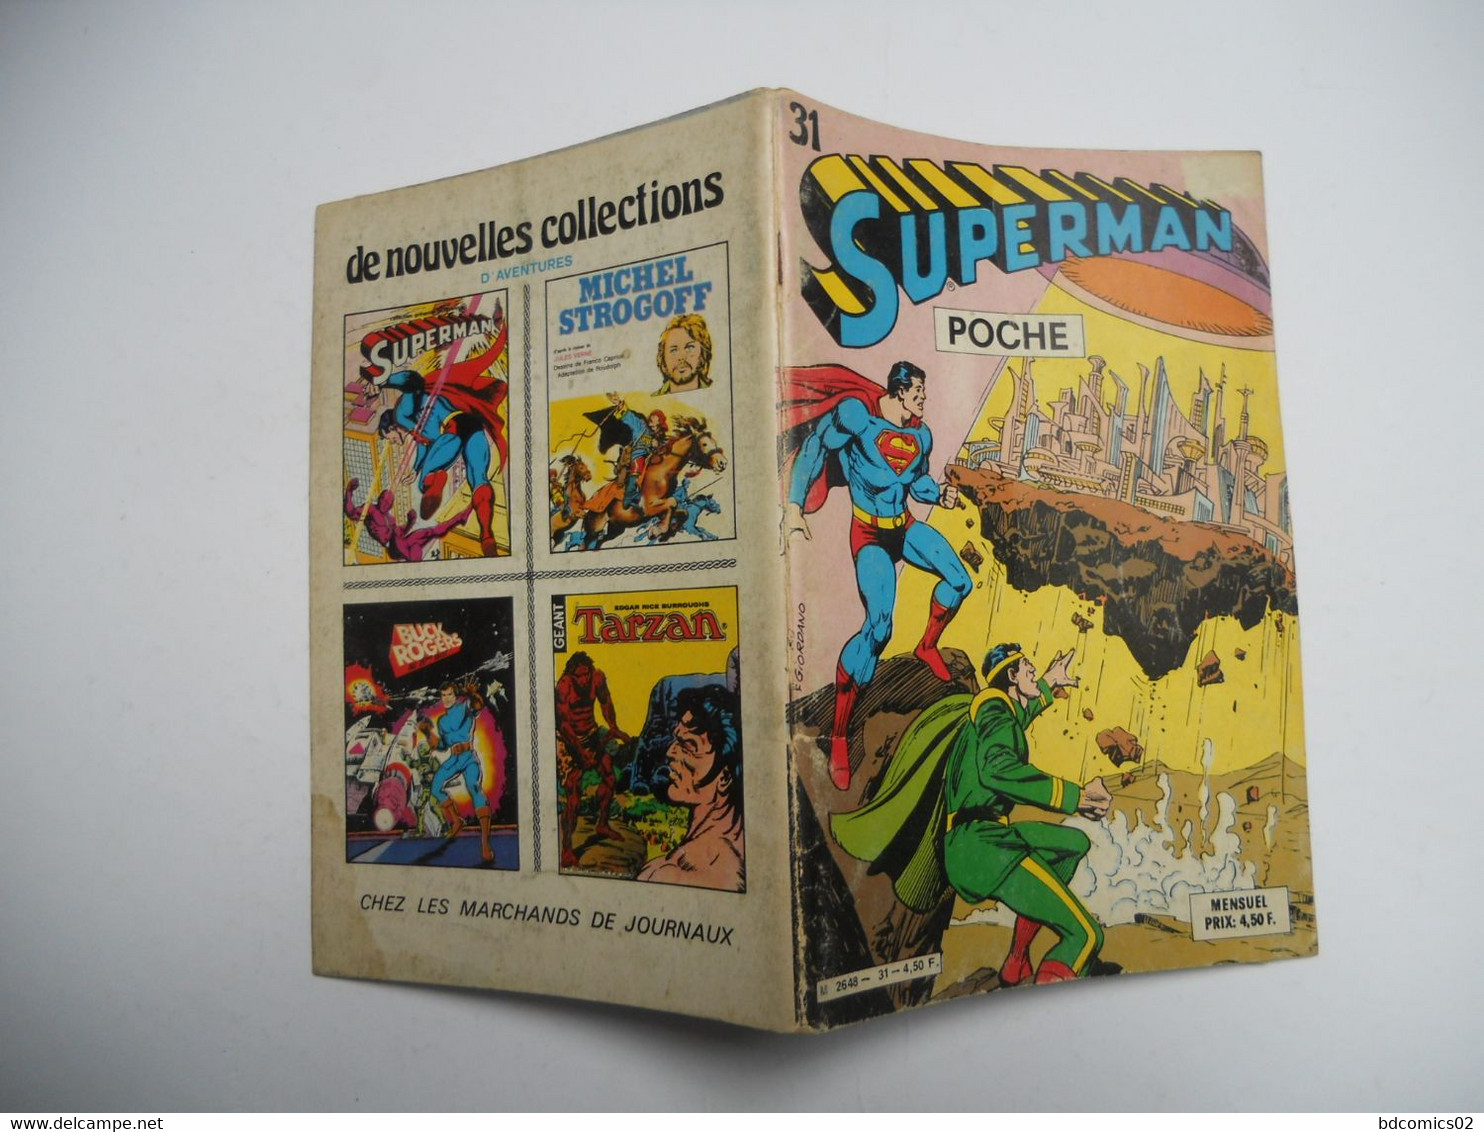 SUPERMAN Poche N° 31 - 1980 - Sagedition Mister Miracle Luthor BE+ - Superman